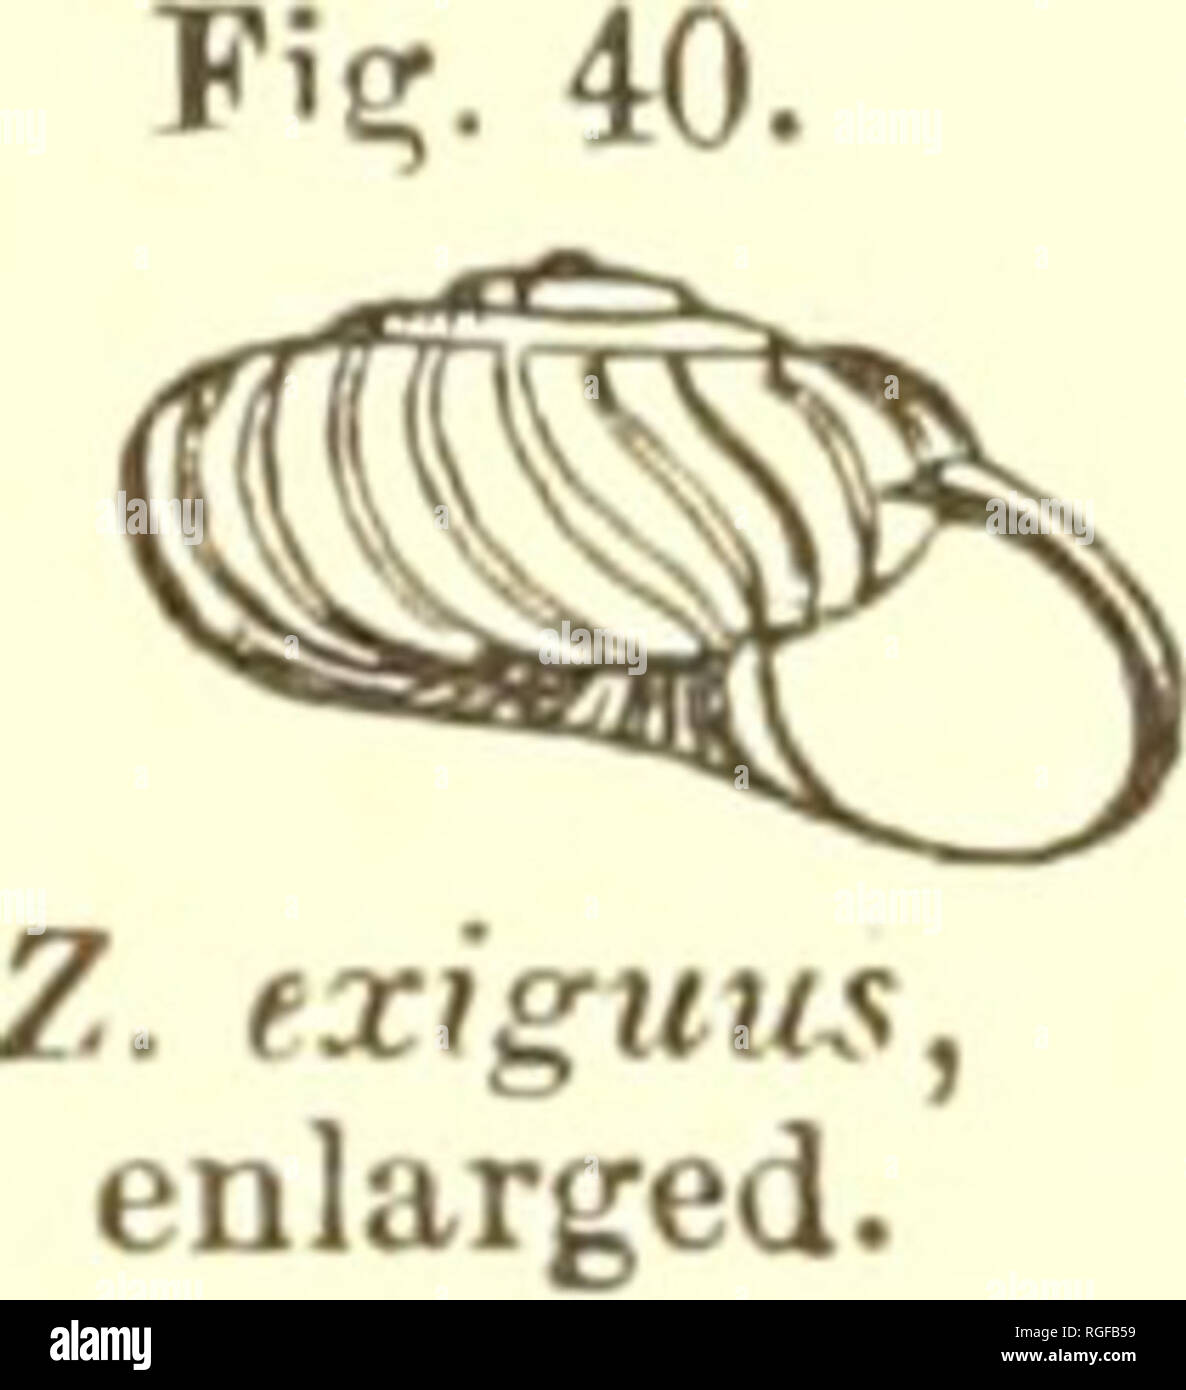 . Bulletin of the Museum of Comparative Zoology at Harvard College. Zoology. '/.. conspectus, enlarged. equal to two sevenths the diameter of the shell; aperture ob- lique, roundly lunate; peristome simple, straight, the margins approaching, the columellar margin scarcely dilated. Greater diameter 2, lesser If mill.; height, 1 mill. Helix conspecta, Bland, Ann. N. Y. Lye. VIII. 163, Fig. 7 (Nov. 1865). Pseudohyalina conspecta, Tryon, Amer. Journ. Conch., II. 265 (1866). Hyalina conspecta, W. G. Binney, L. [&amp; Fr.-W. Sh., I. 41 (1869). In the Pacific Province at San Francisco and Monterey, C Stock Photo